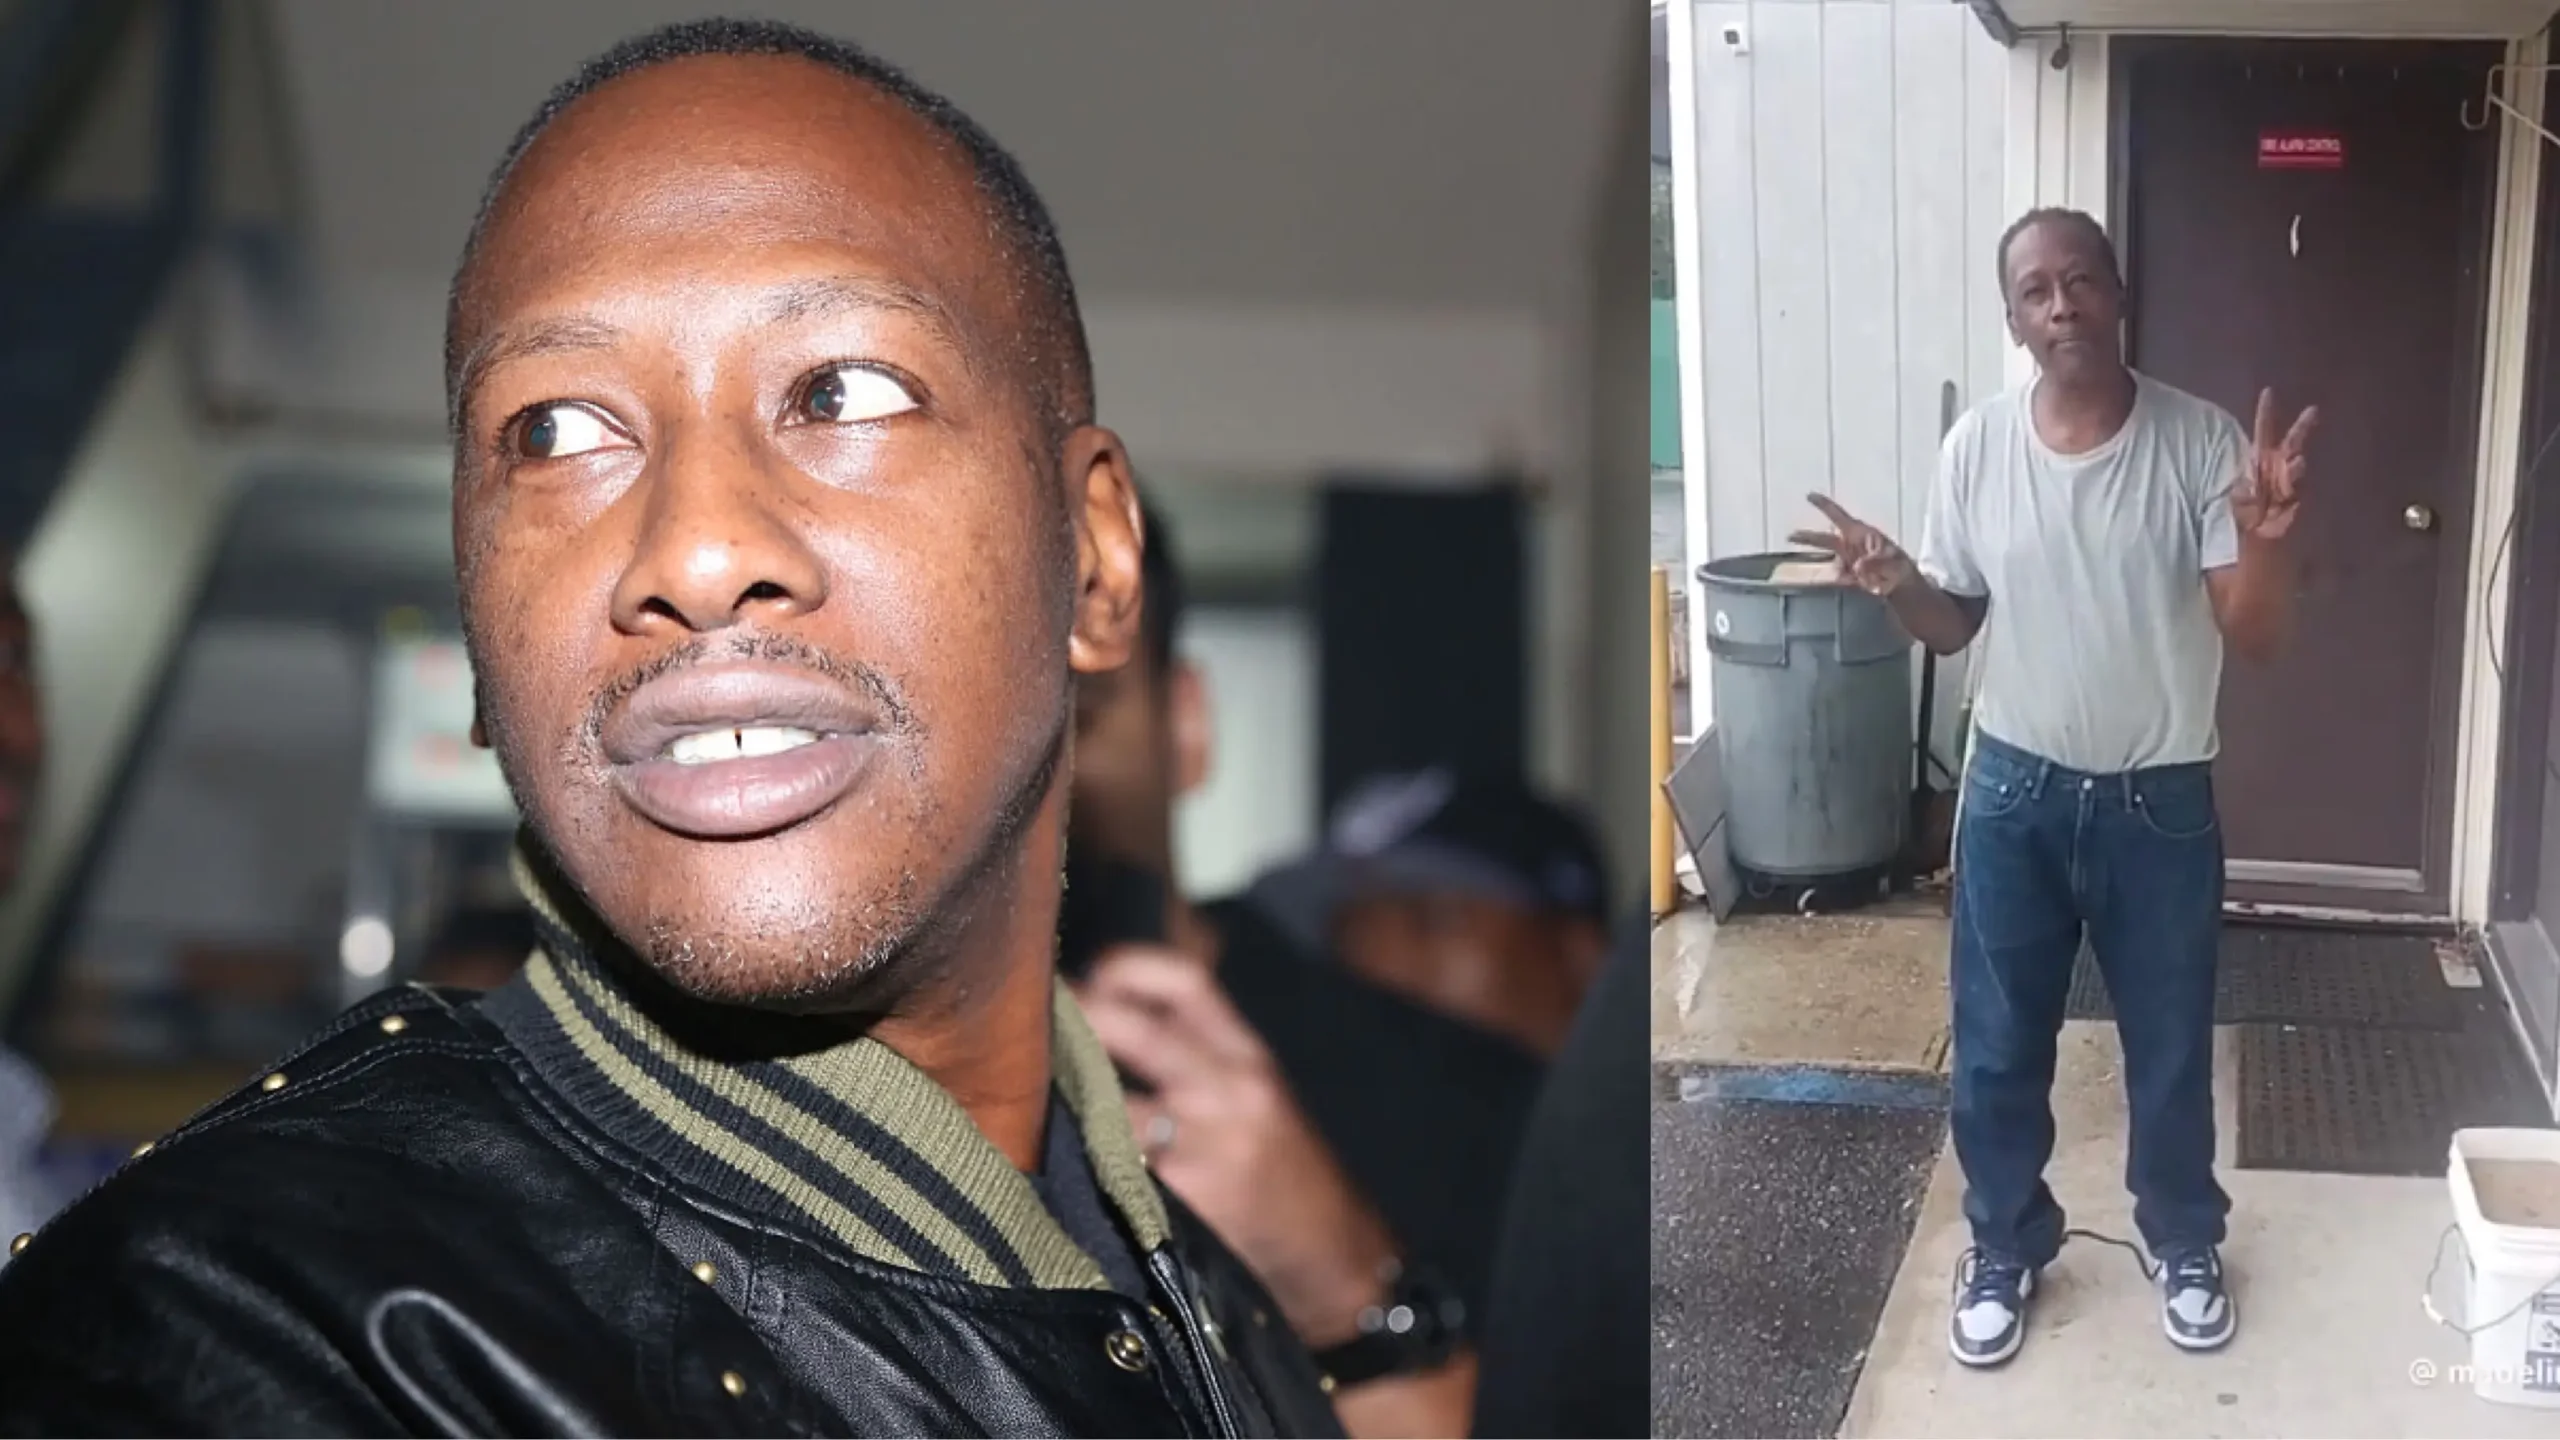 You Want $20? So Rap': Fans Rush to Defend Keith Murray After Shocking  Video Shows Him Seemingly Disoriented and In Need of $20